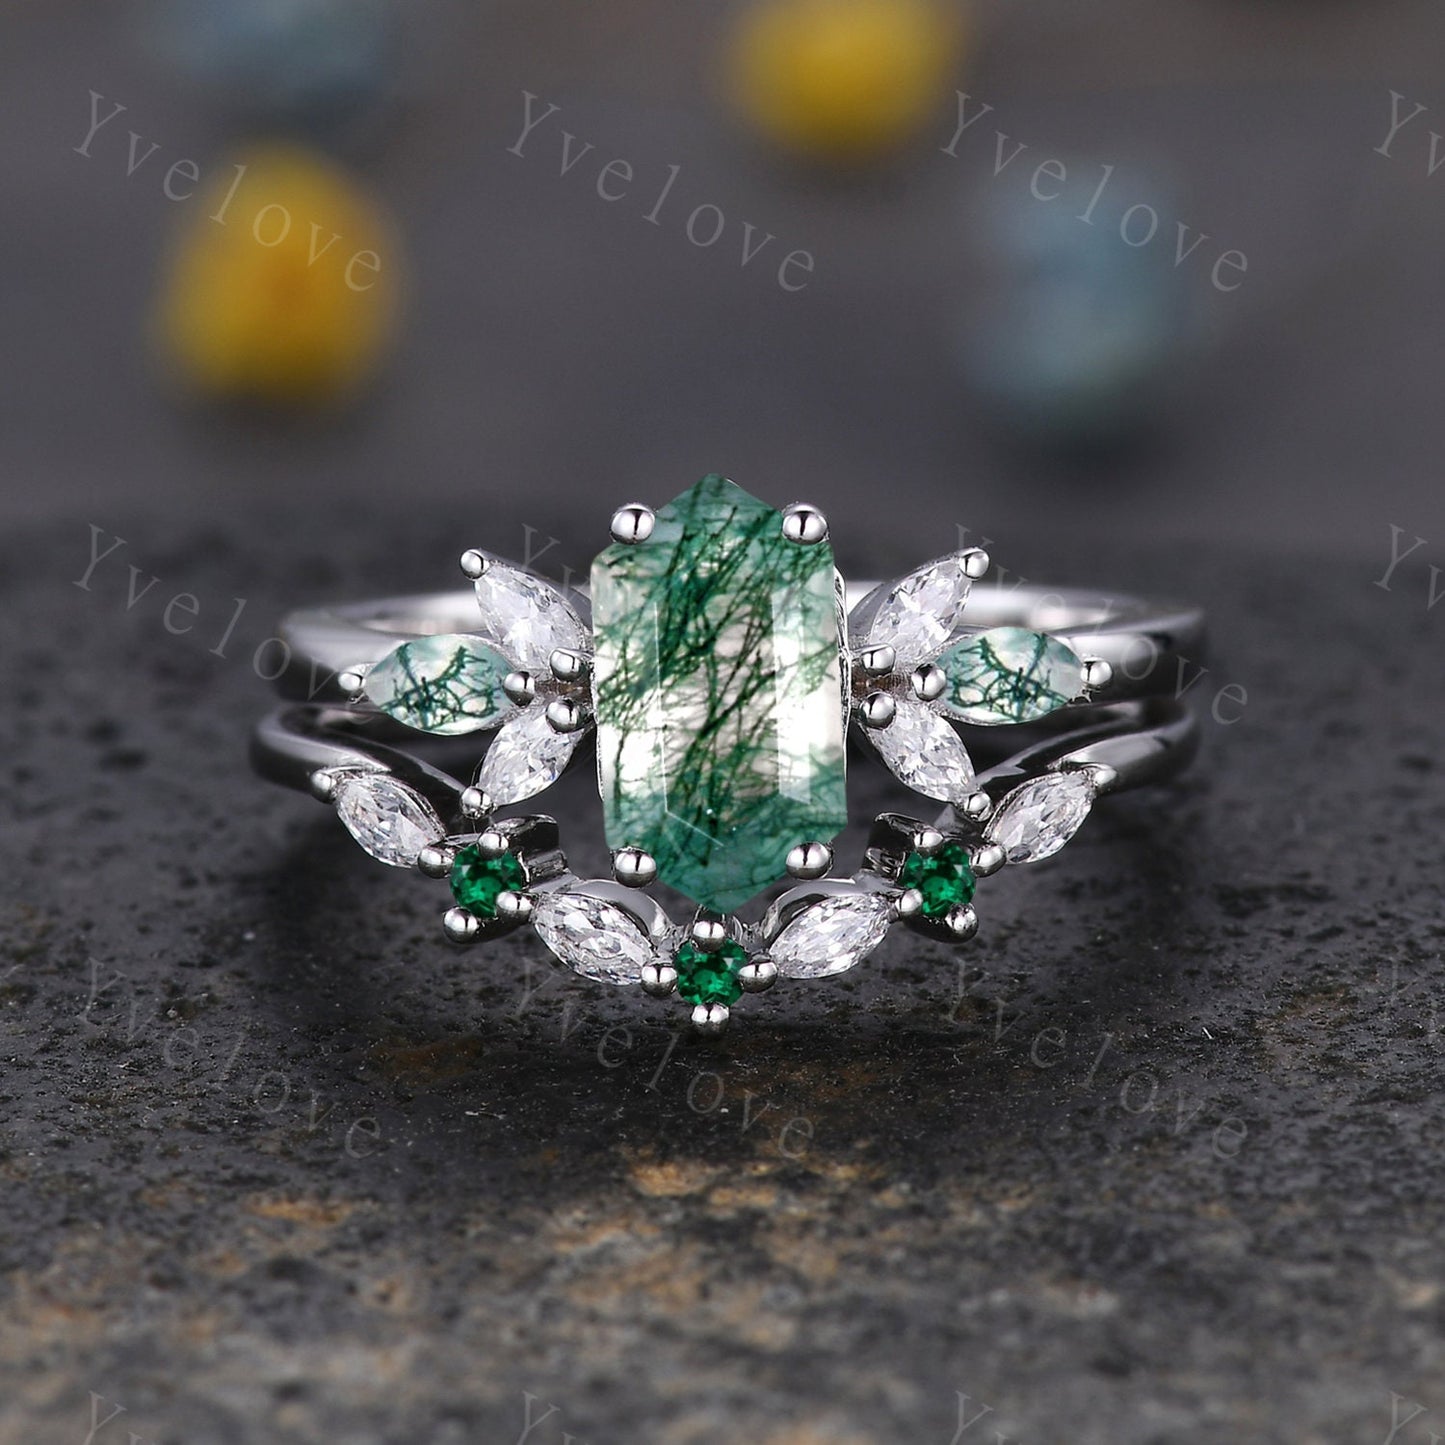 Vintage Hexagon cut Moss Agate Engagement Ring,Unique Bridal Ring Marquise Moissanite Green Agate Wedding Band Promise Ring Gift Silver Ring